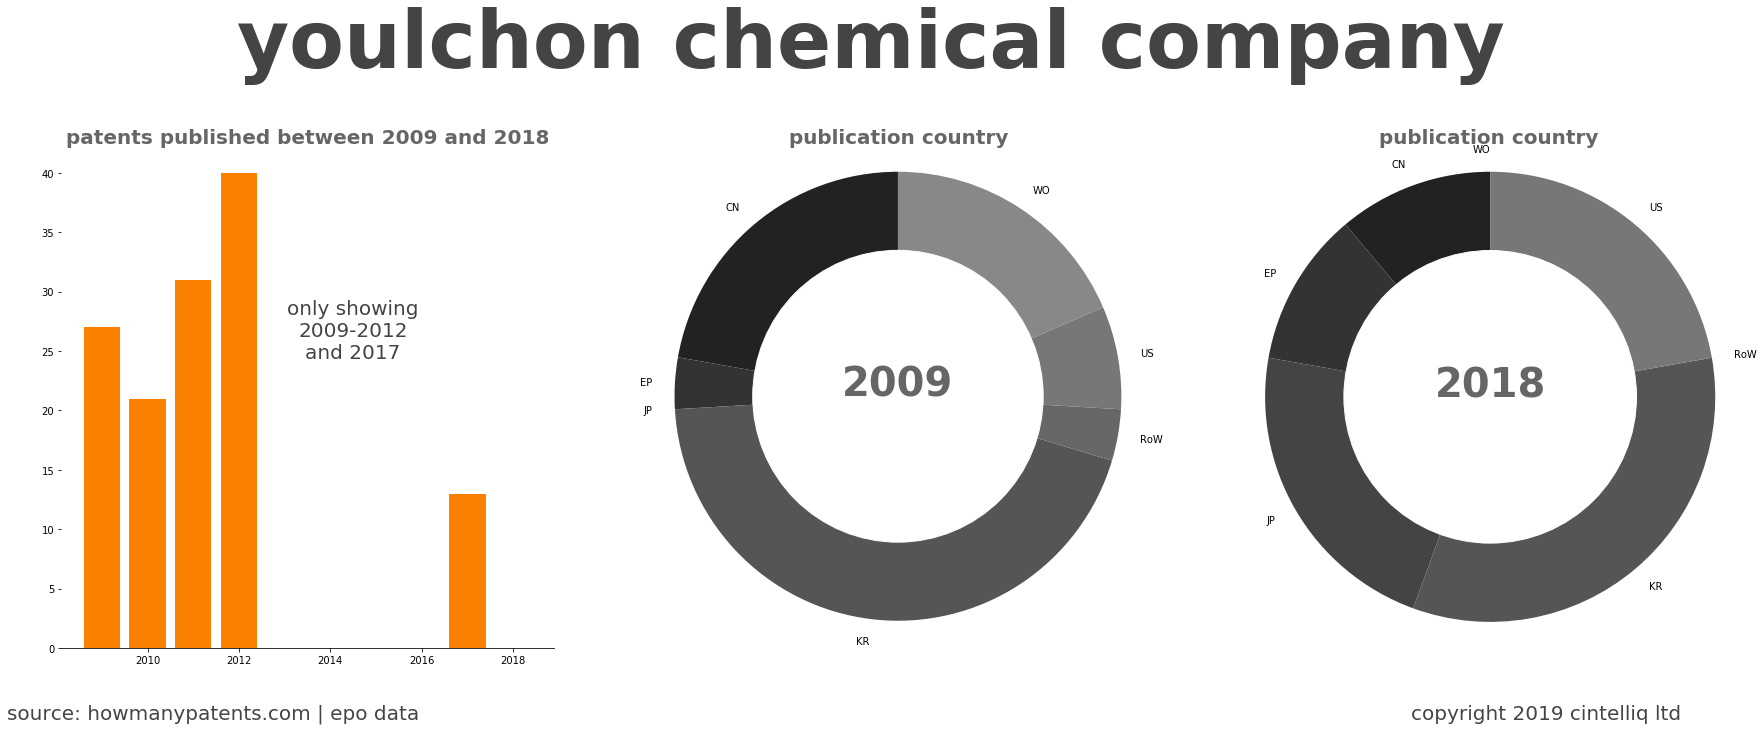 summary of patents for Youlchon Chemical Company